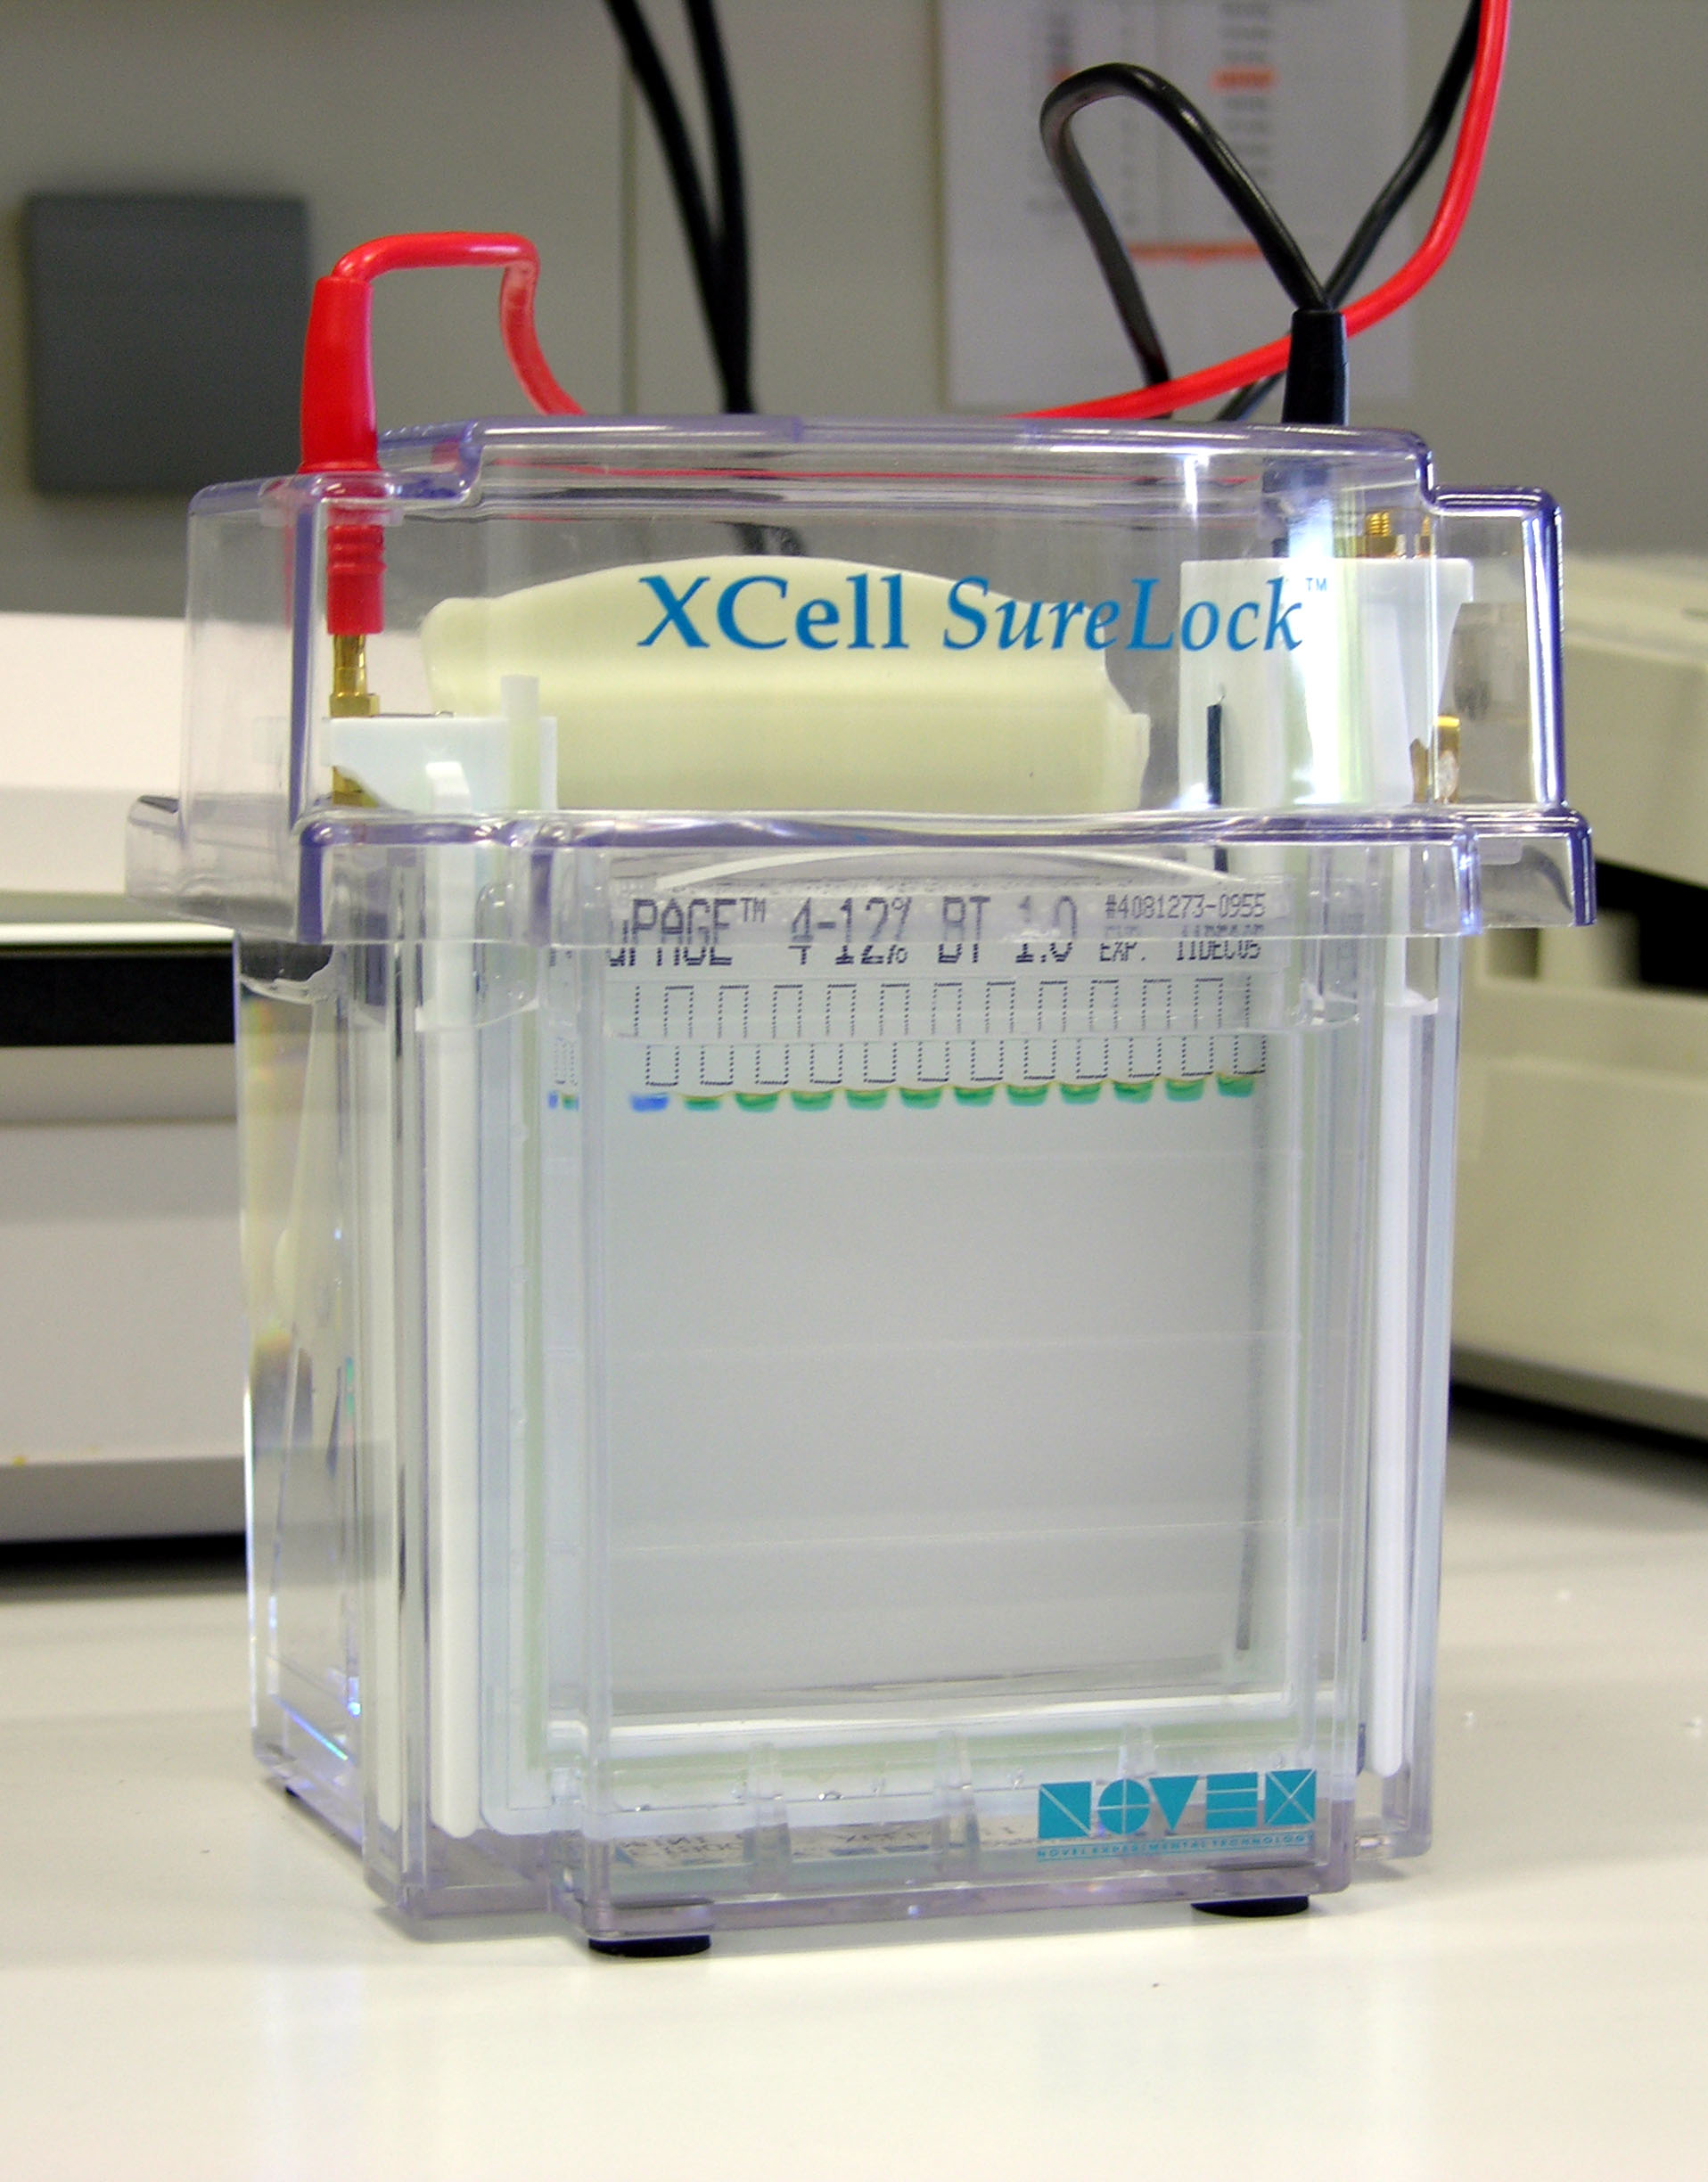    . Cell for protein electrophoresis